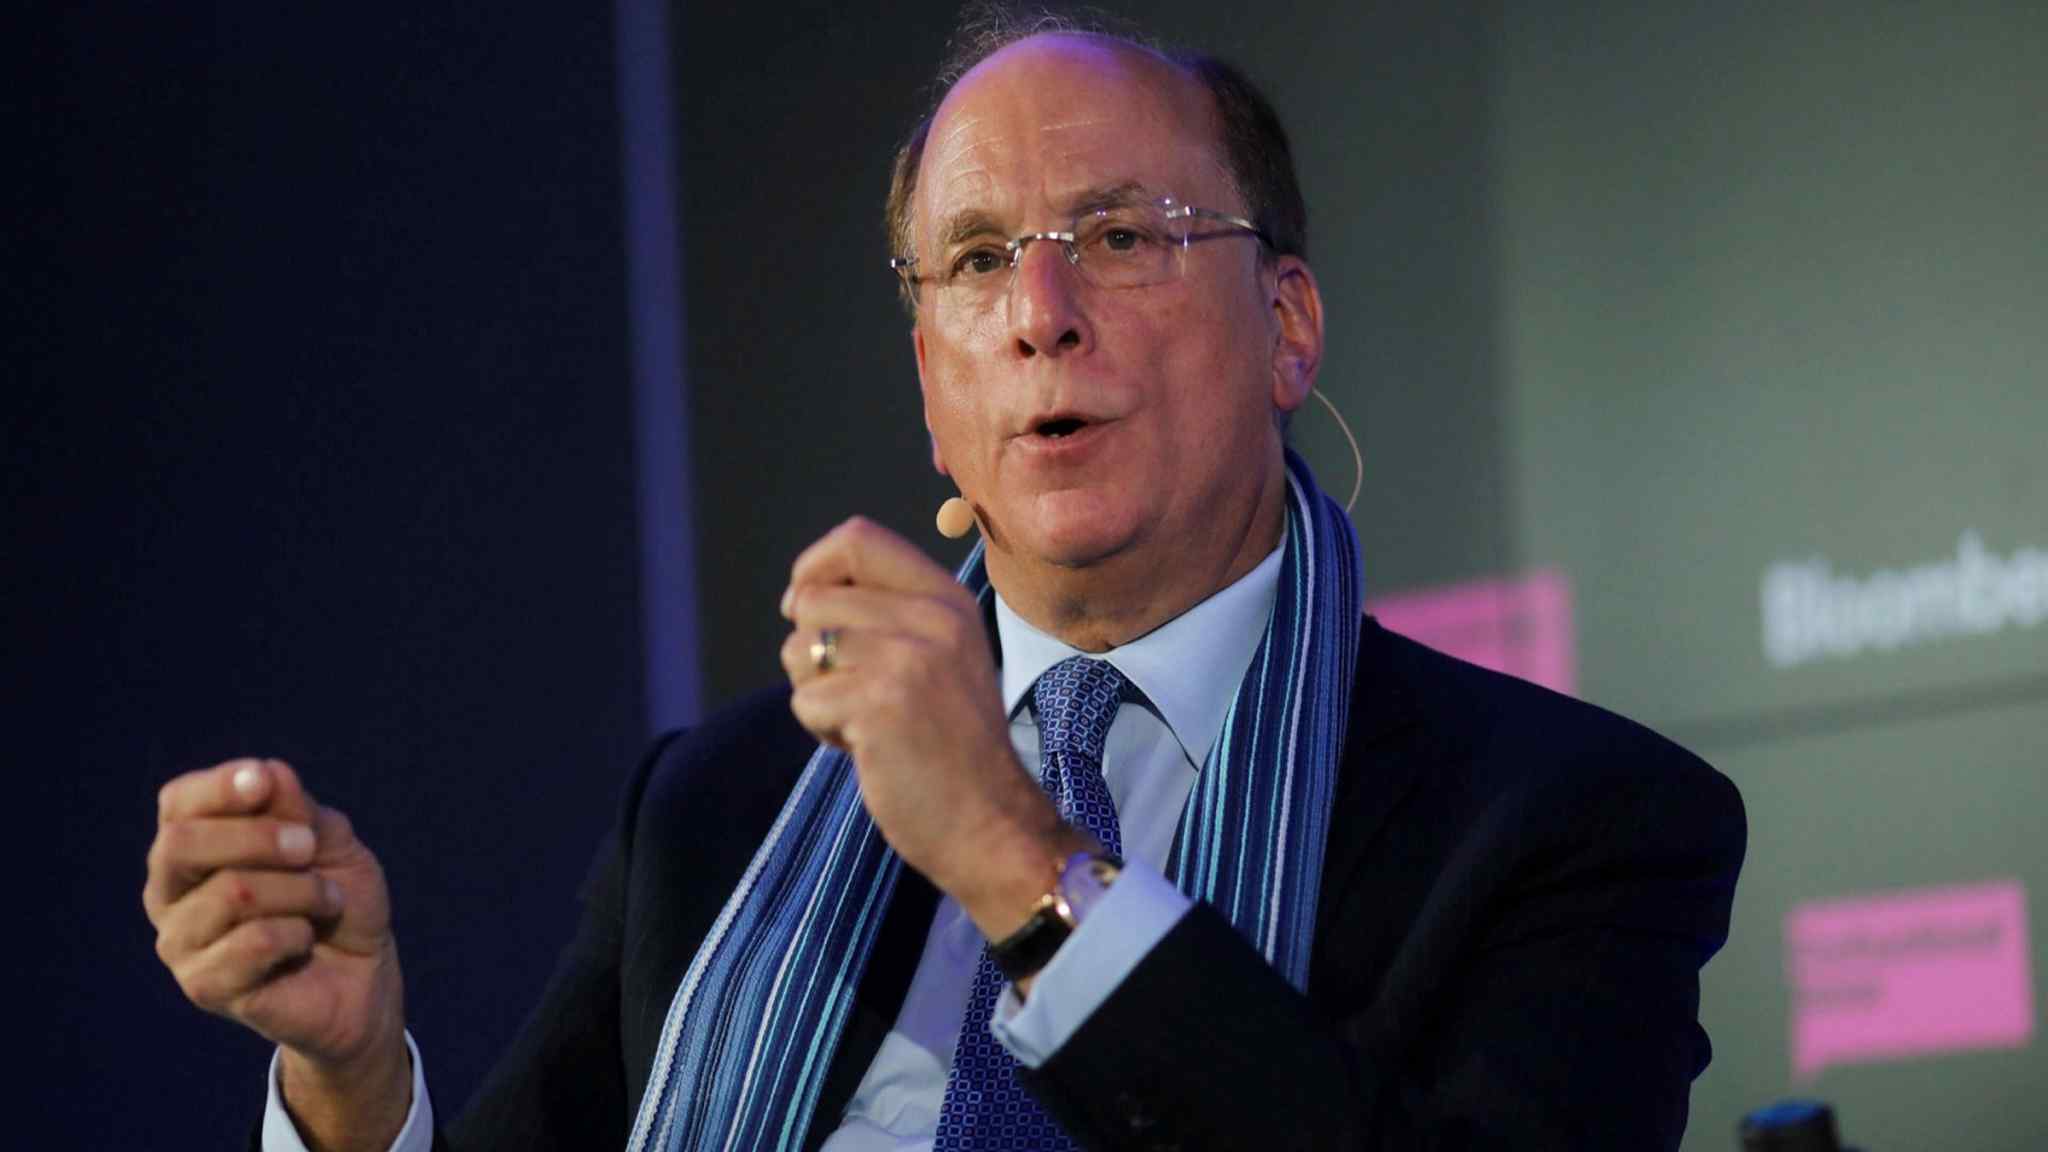 BlackRock’s Fink rejects accusations of being ‘woke’